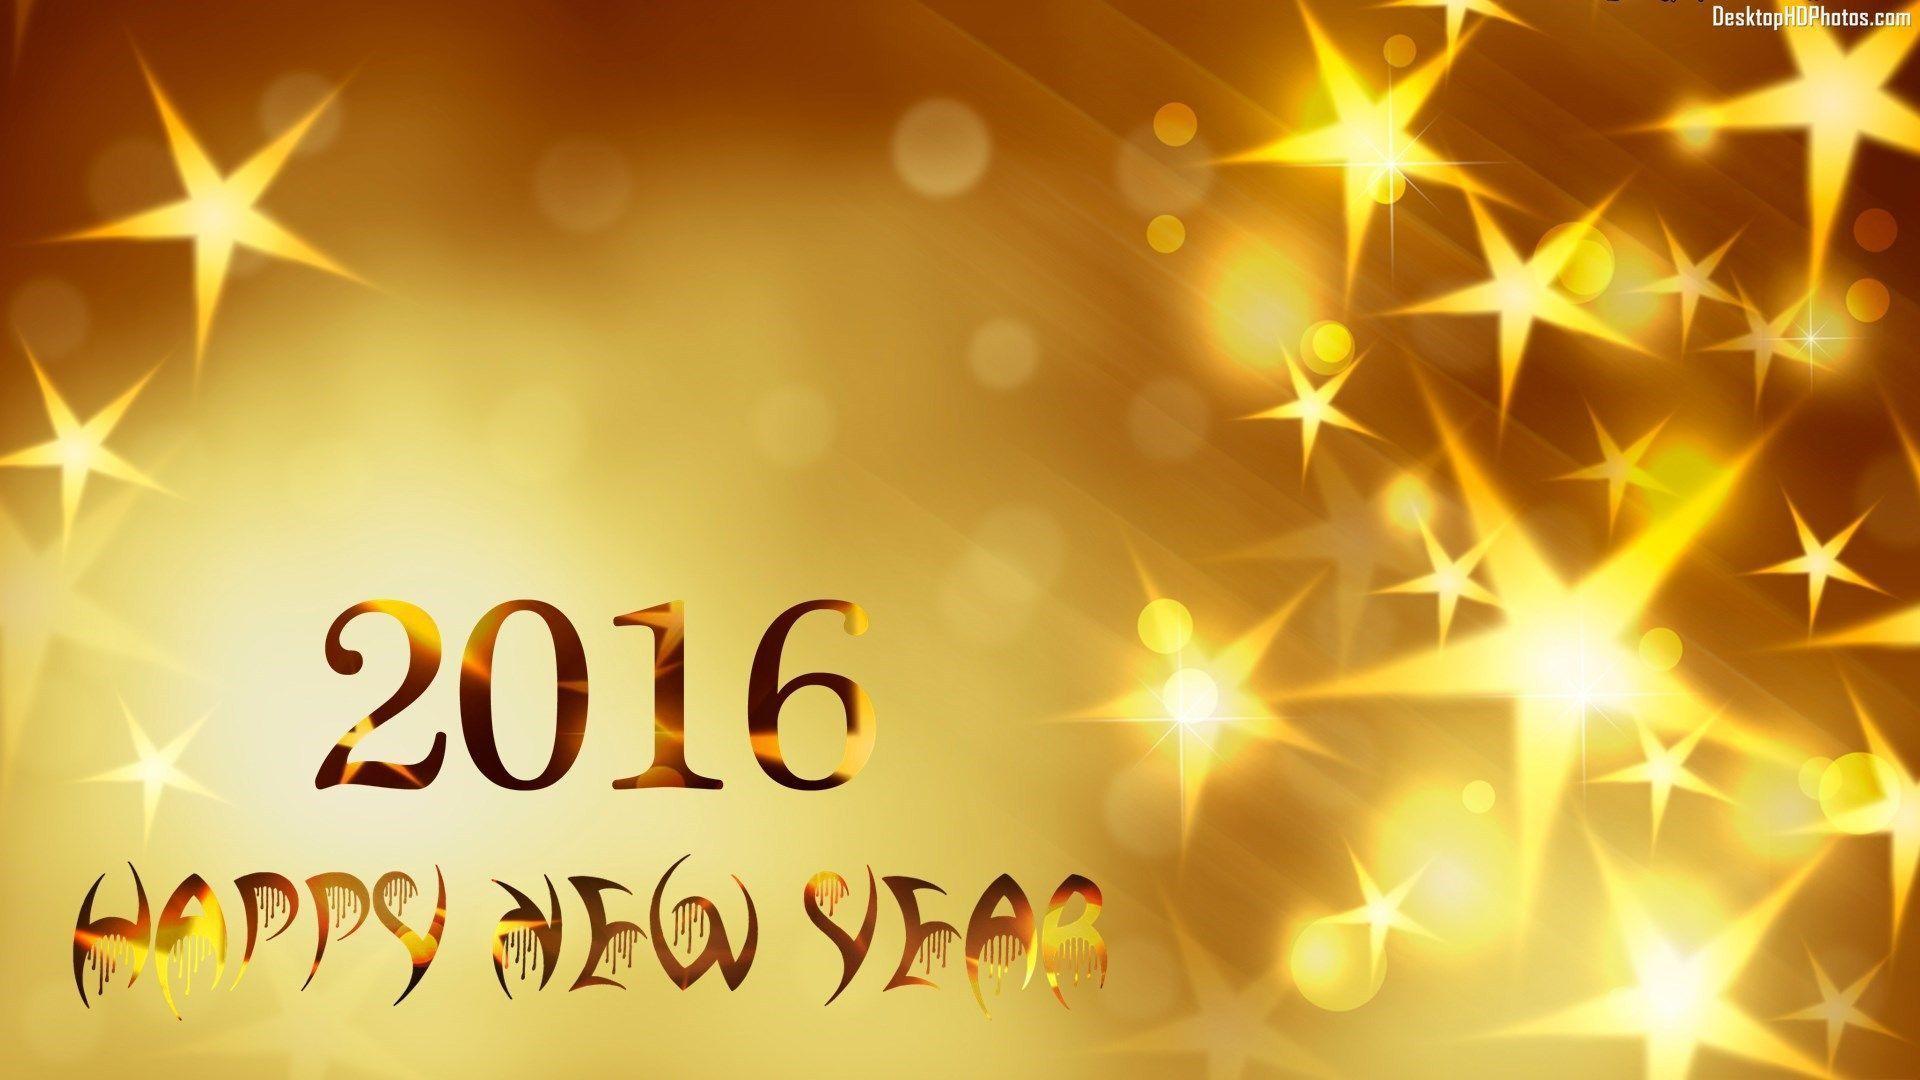 Happy New Year 2016 WallPapers HD Wallpaper